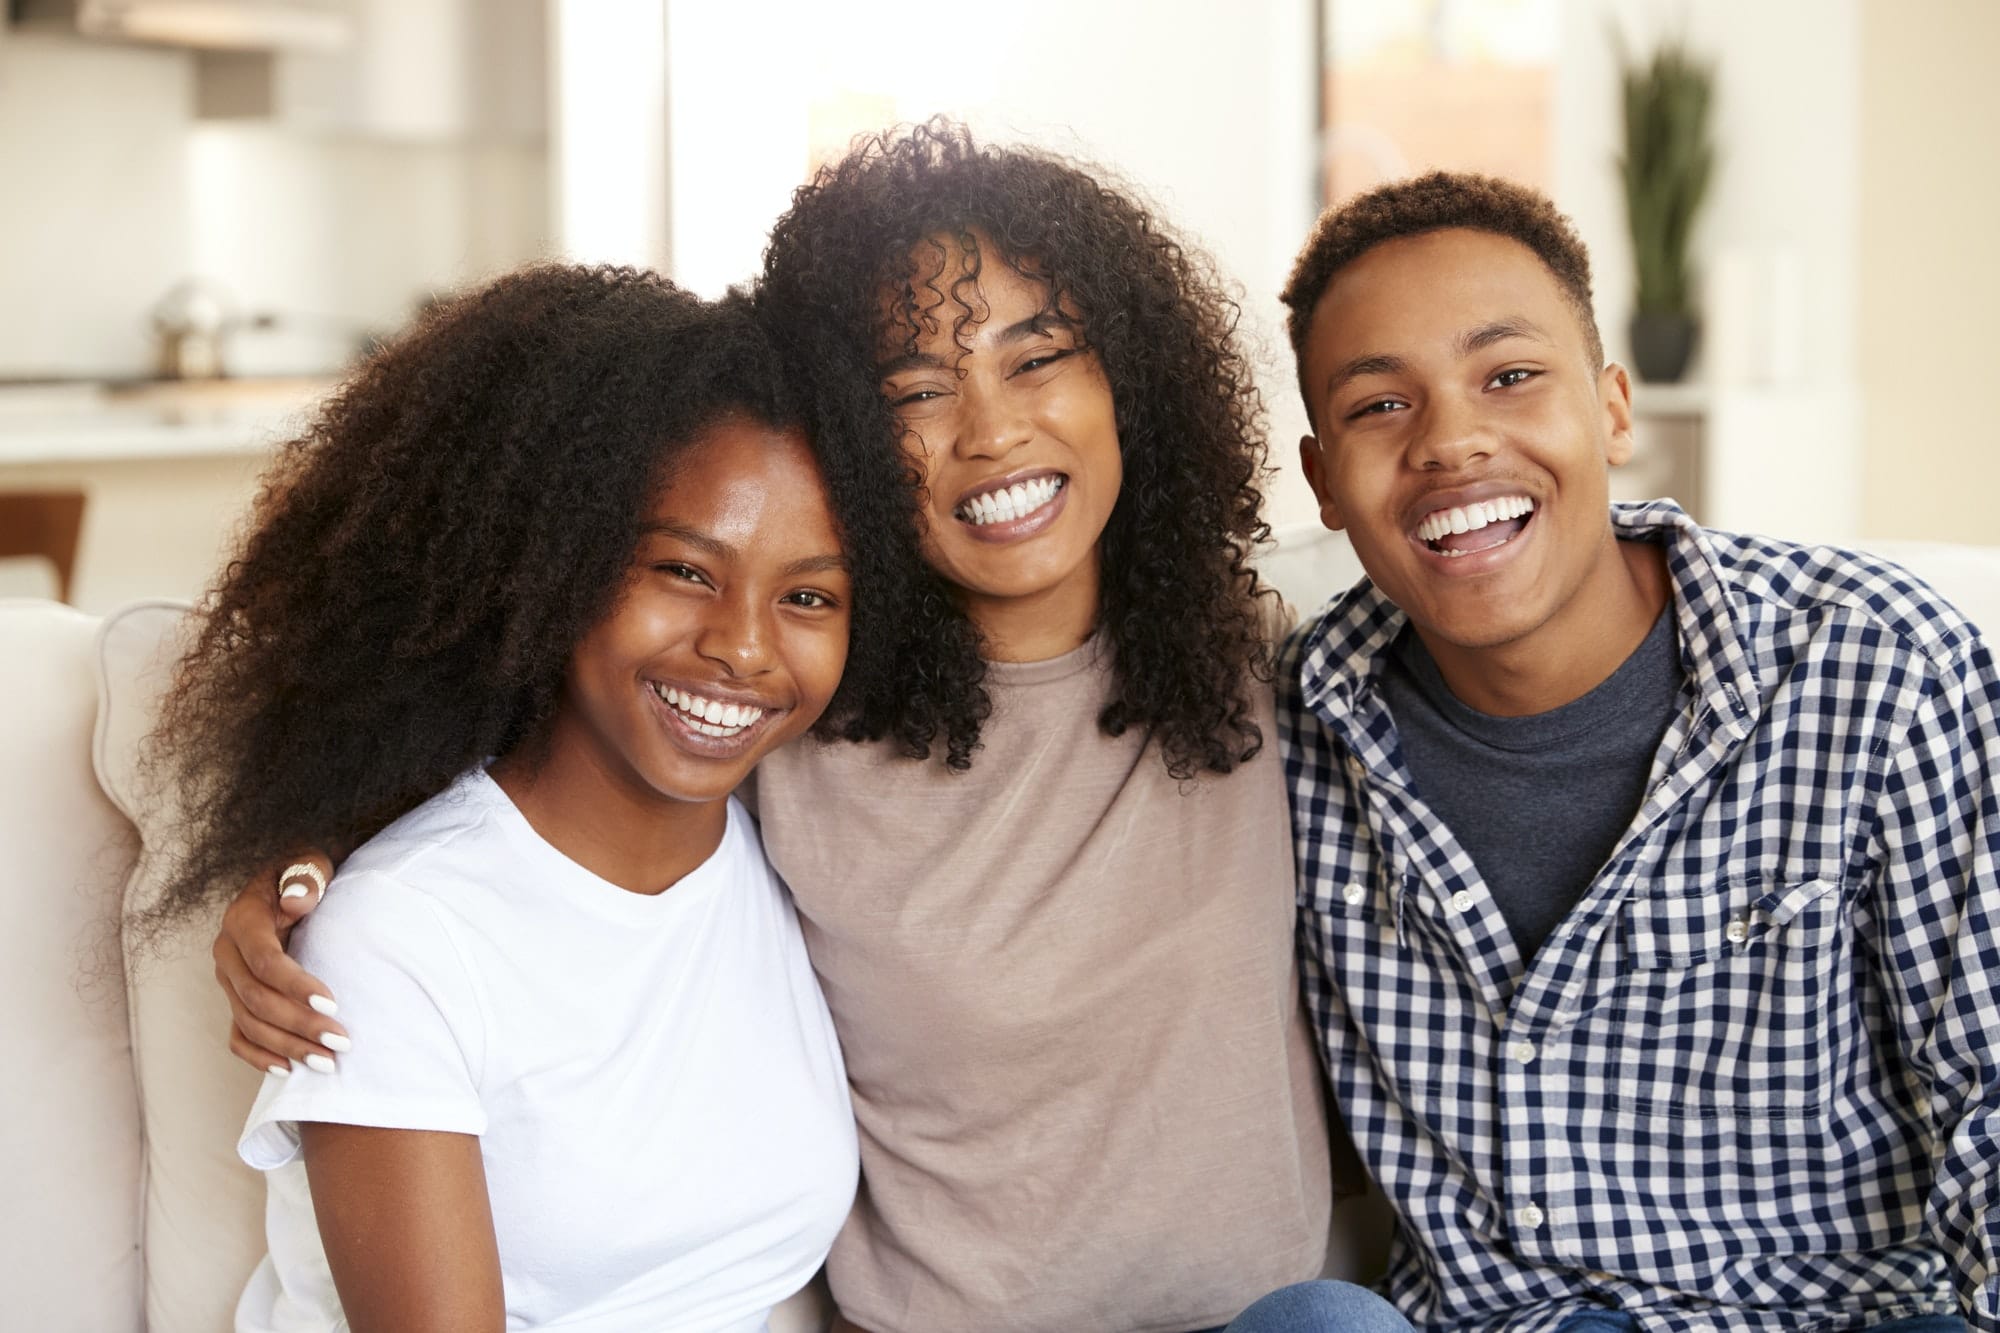 Black teen and young adult brother and sisters smiling to camera, close up